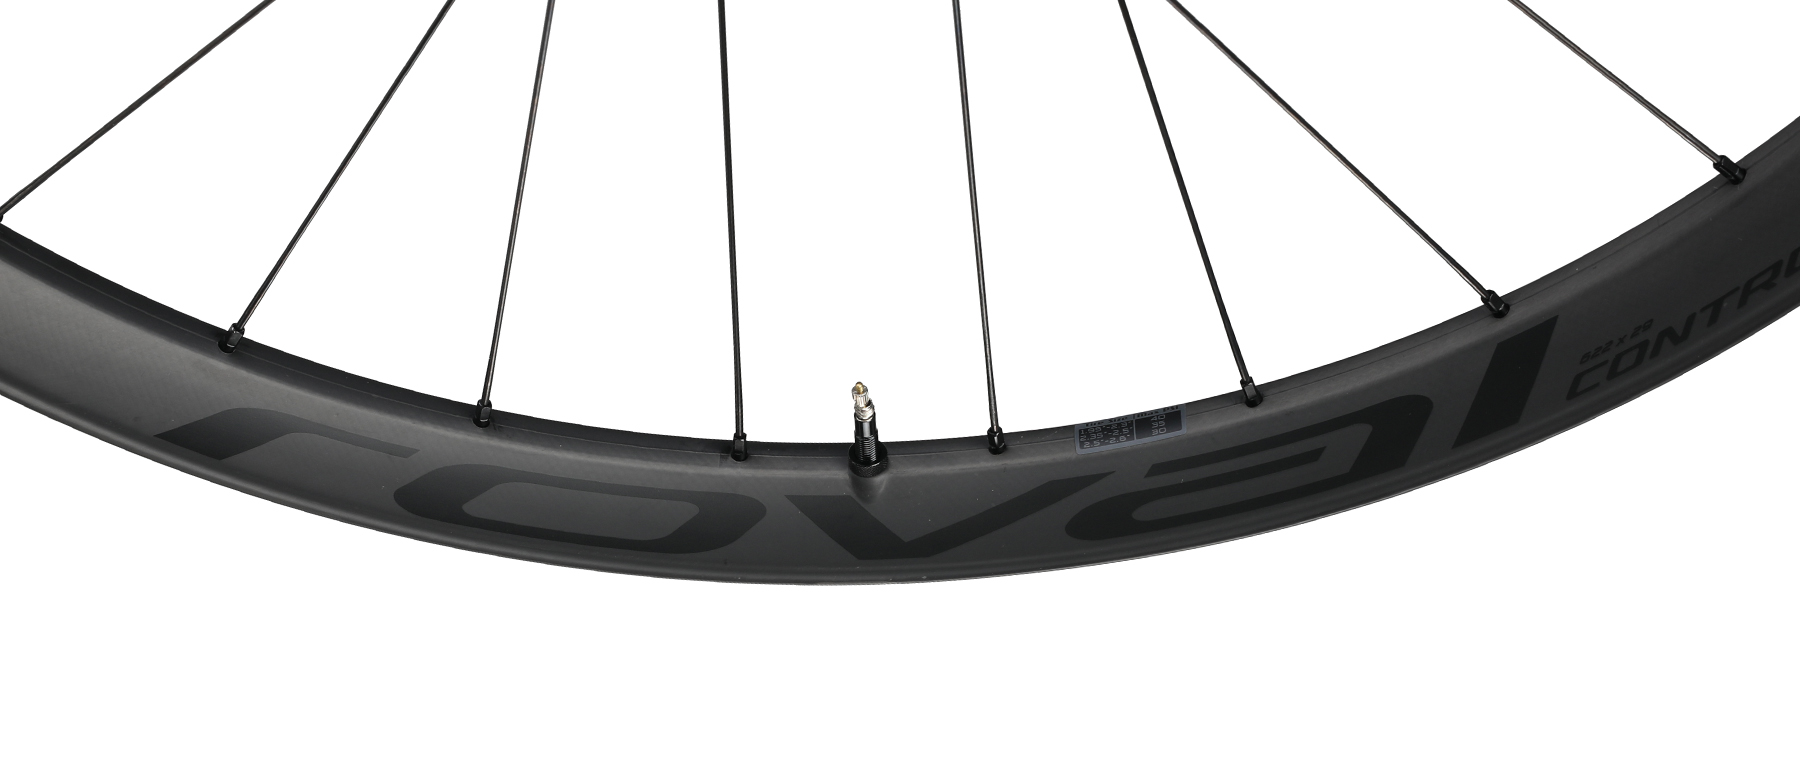 Roval Control Carbon Wheelset